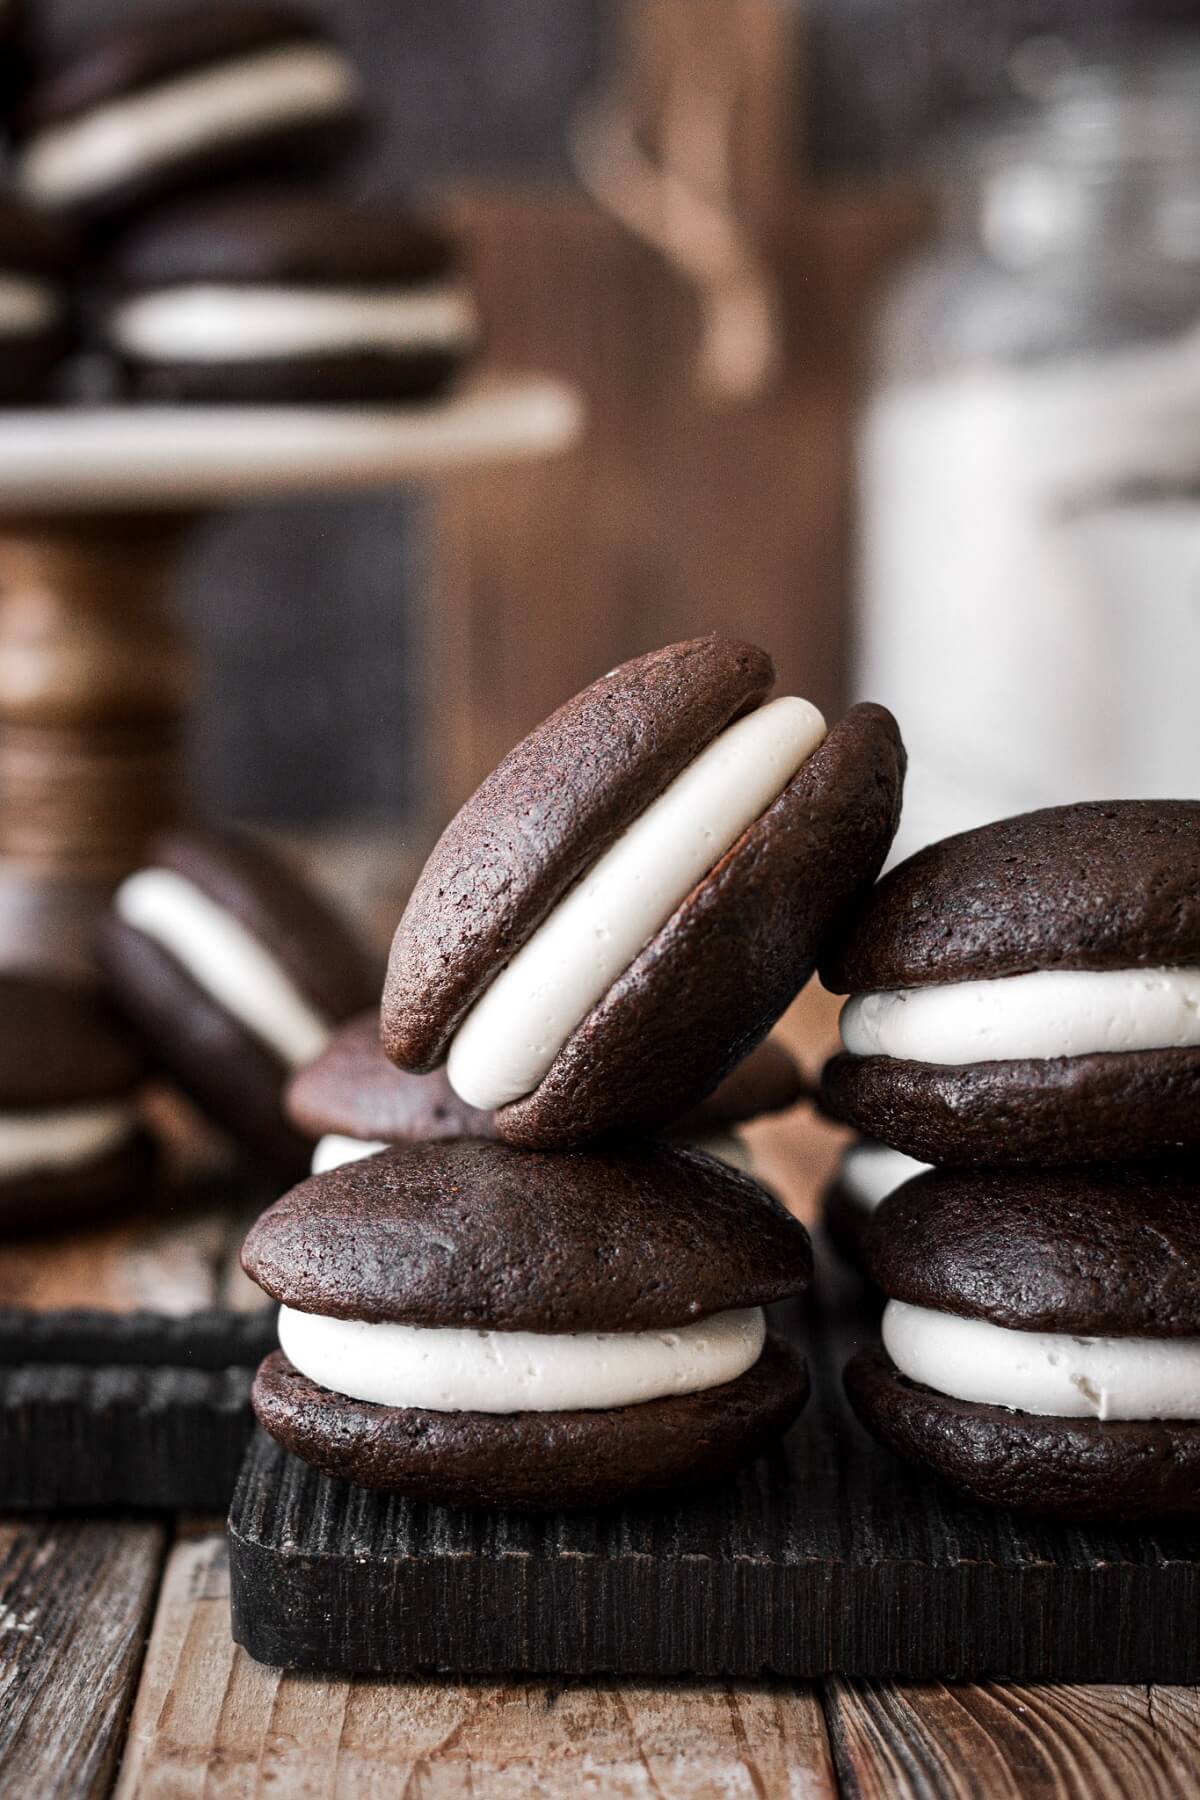 Chocolate whoopie pies with vanilla buttercream filling on a wooden board.